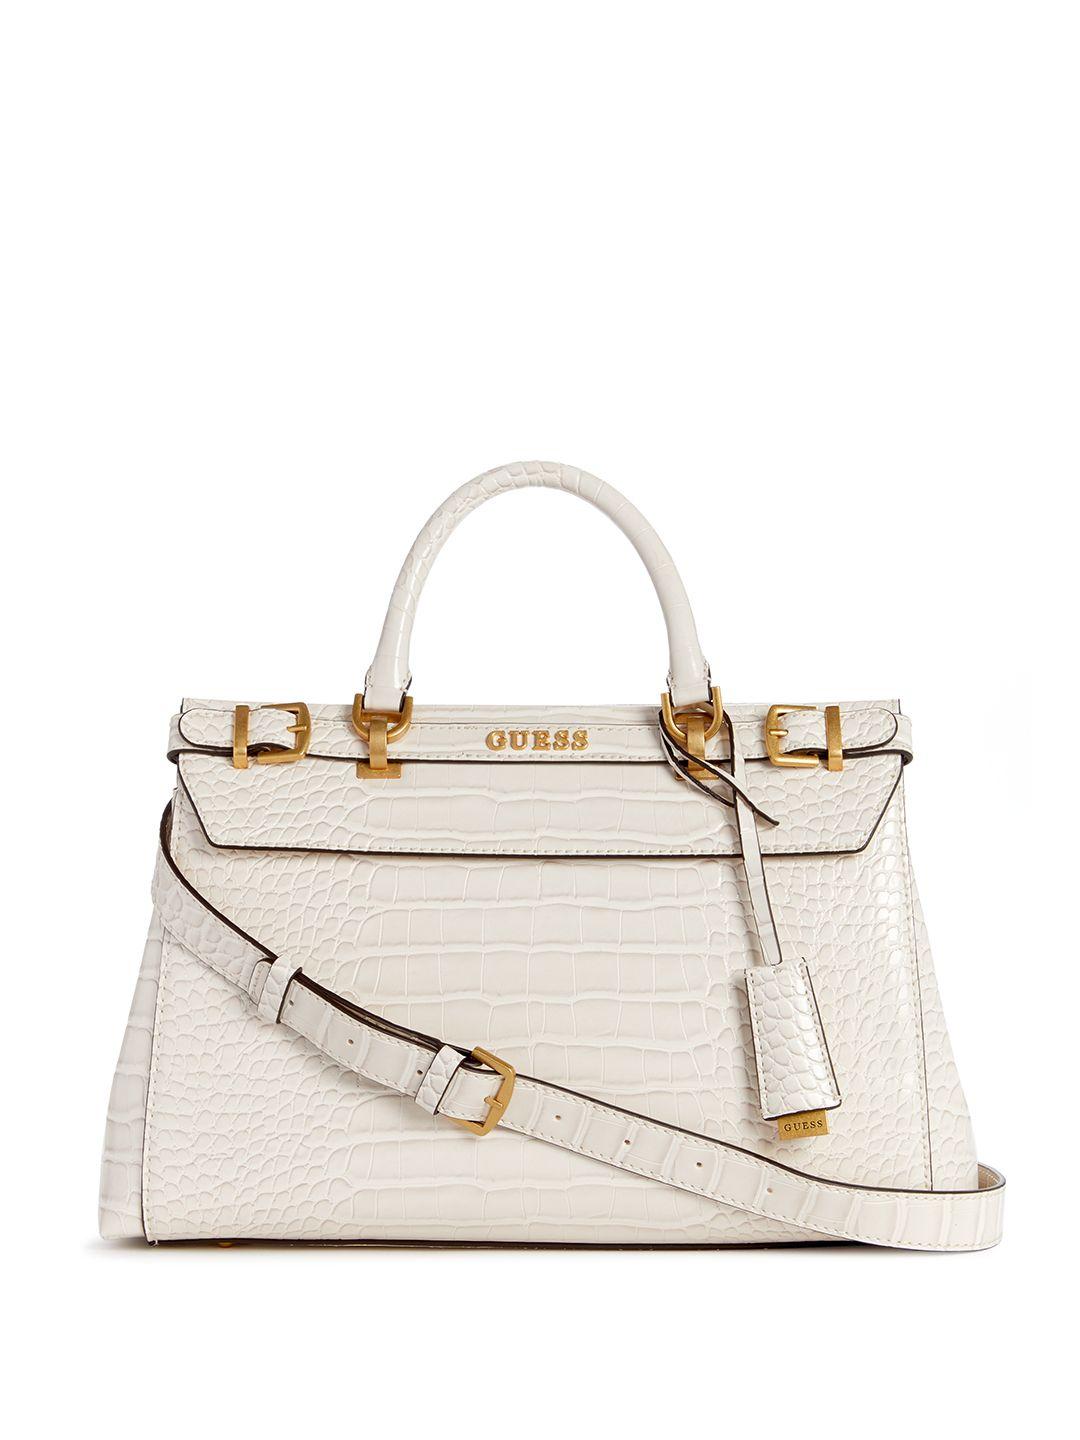 guess croc textured structured handheld bag with buckle detail